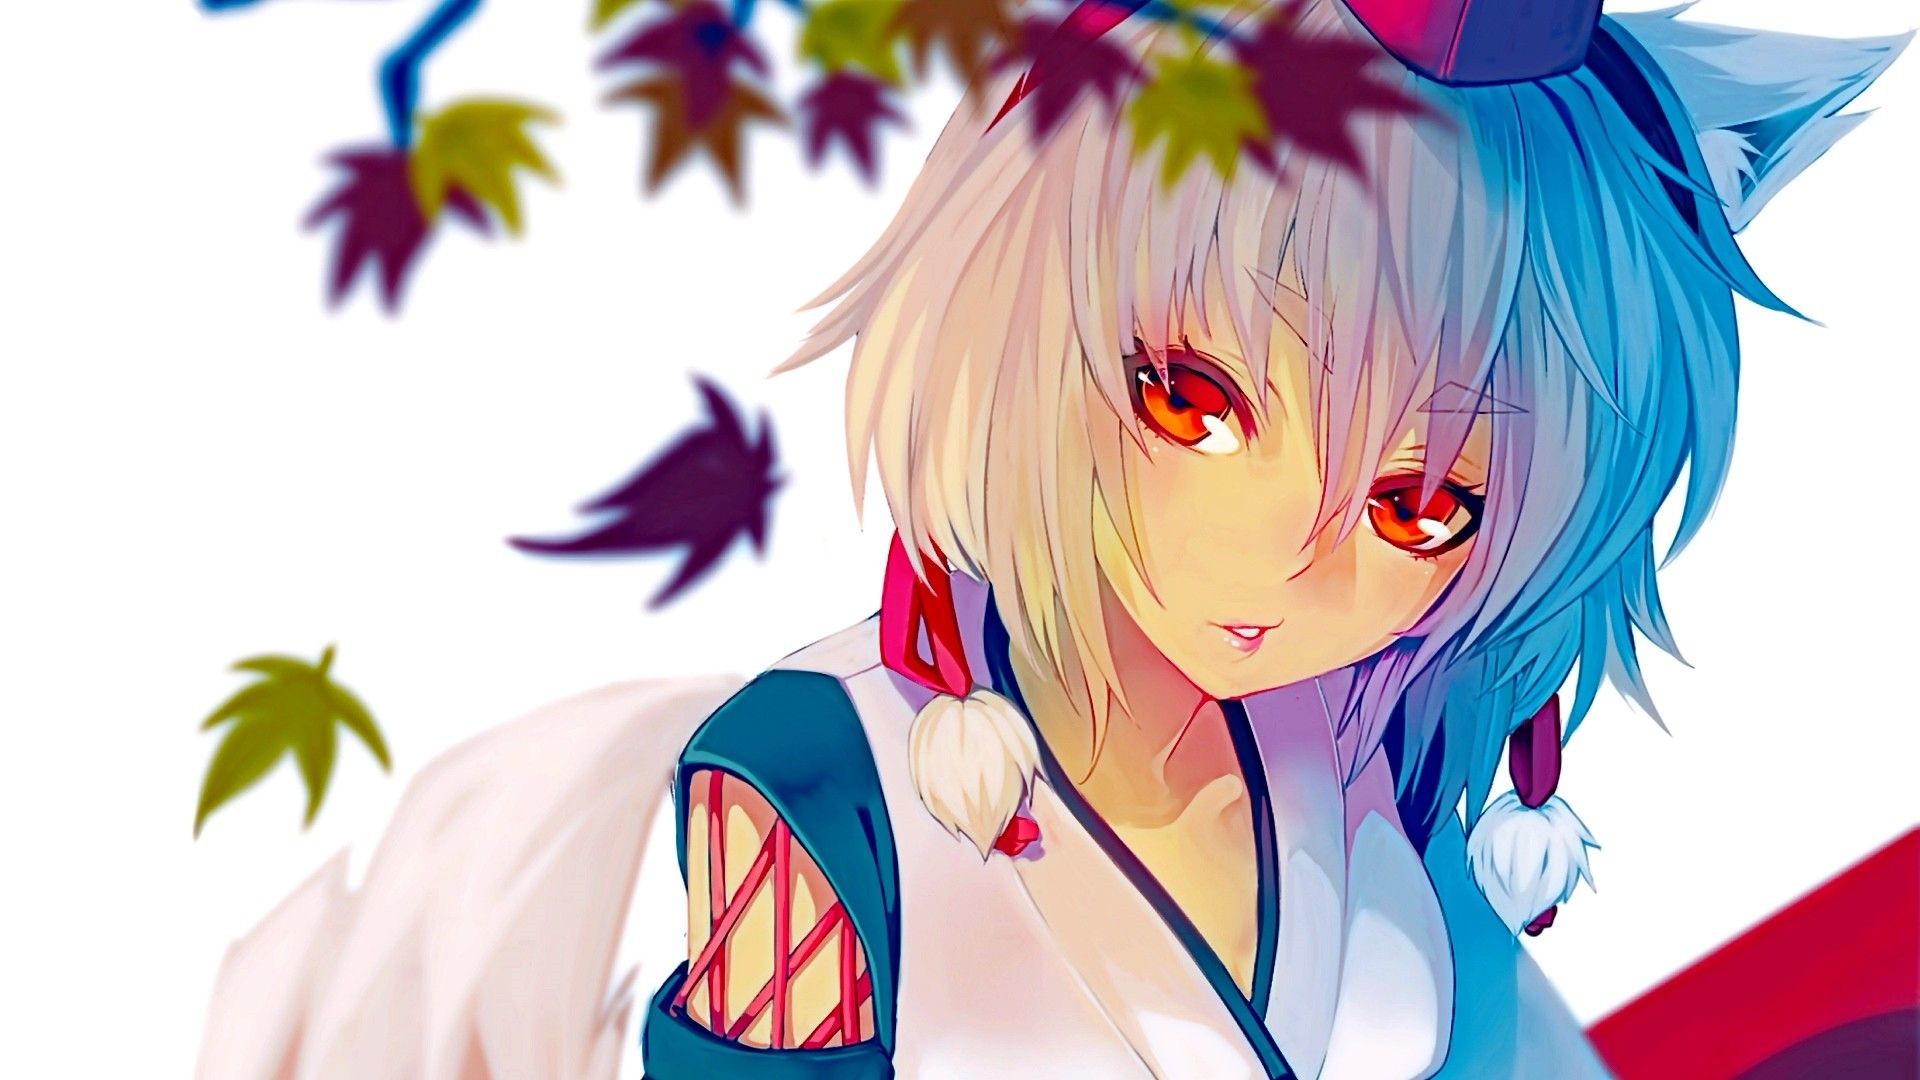 1920x1080 beautiful wolf-girl / cat-girl with white hair and red eyes